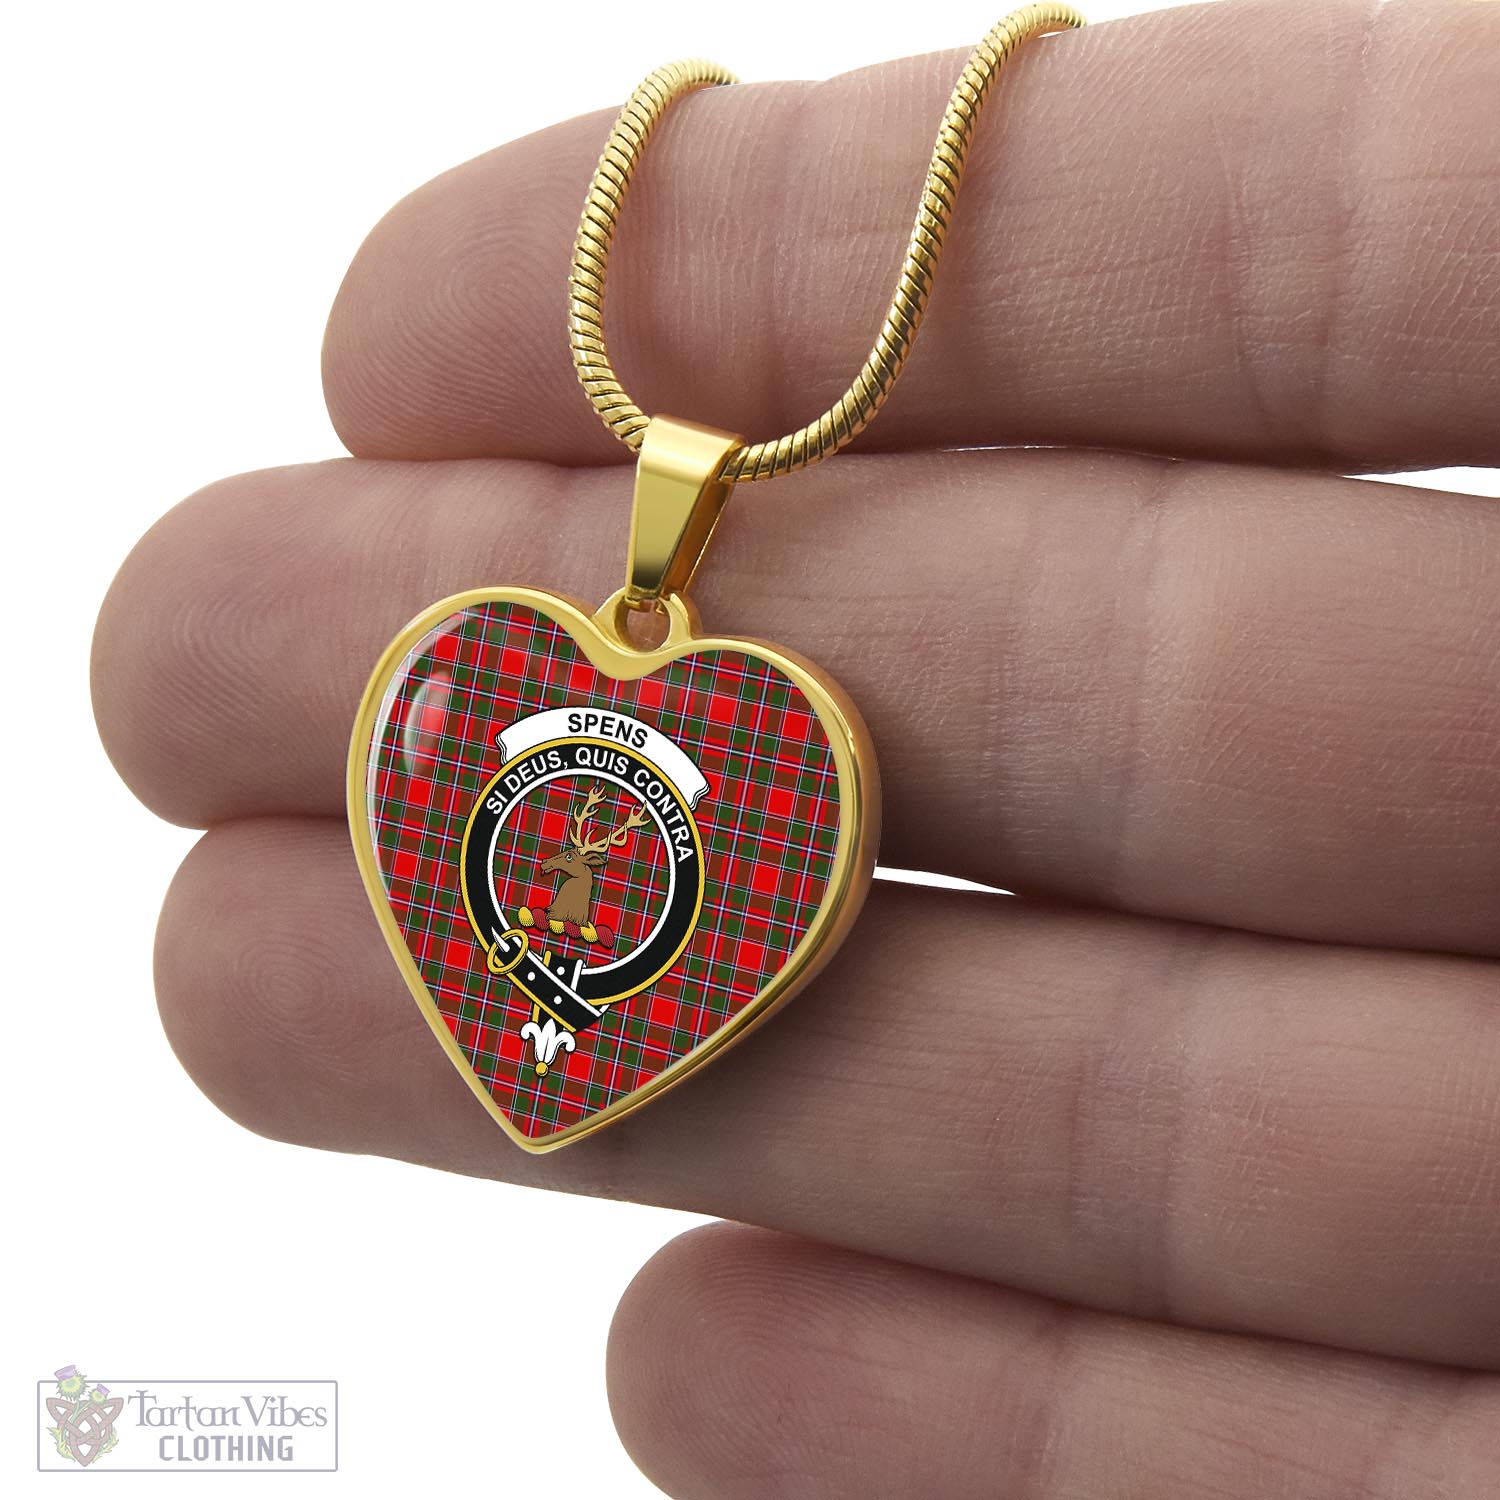 Tartan Vibes Clothing Spens Modern Tartan Heart Necklace with Family Crest